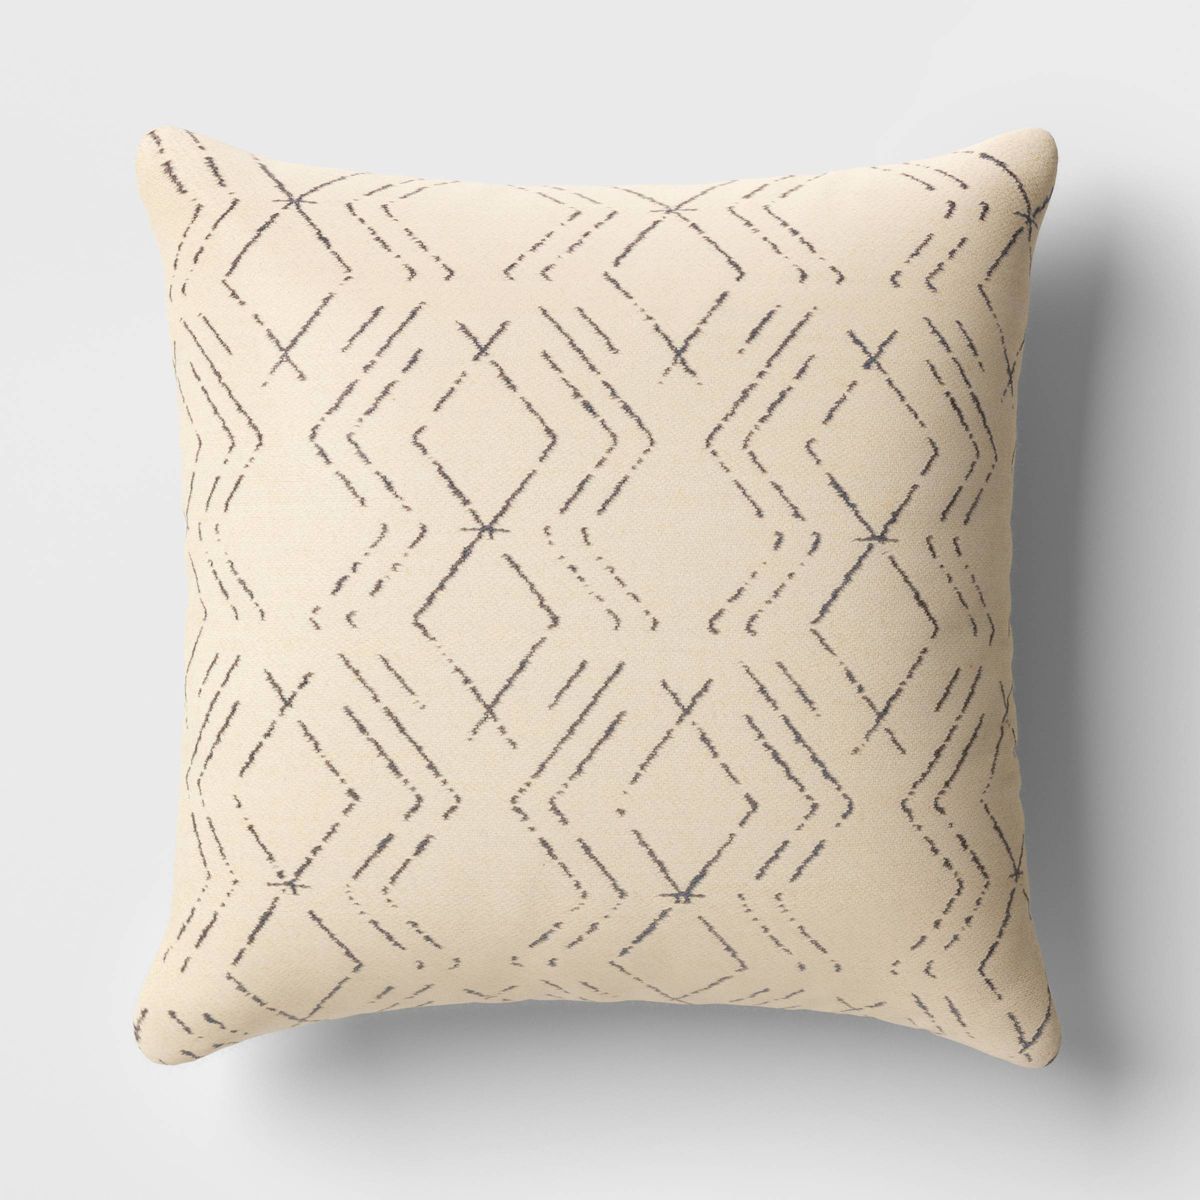 20"x20" Diamond Lines Square Outdoor Throw Pillow Gray/Beige - Threshold™ | Target